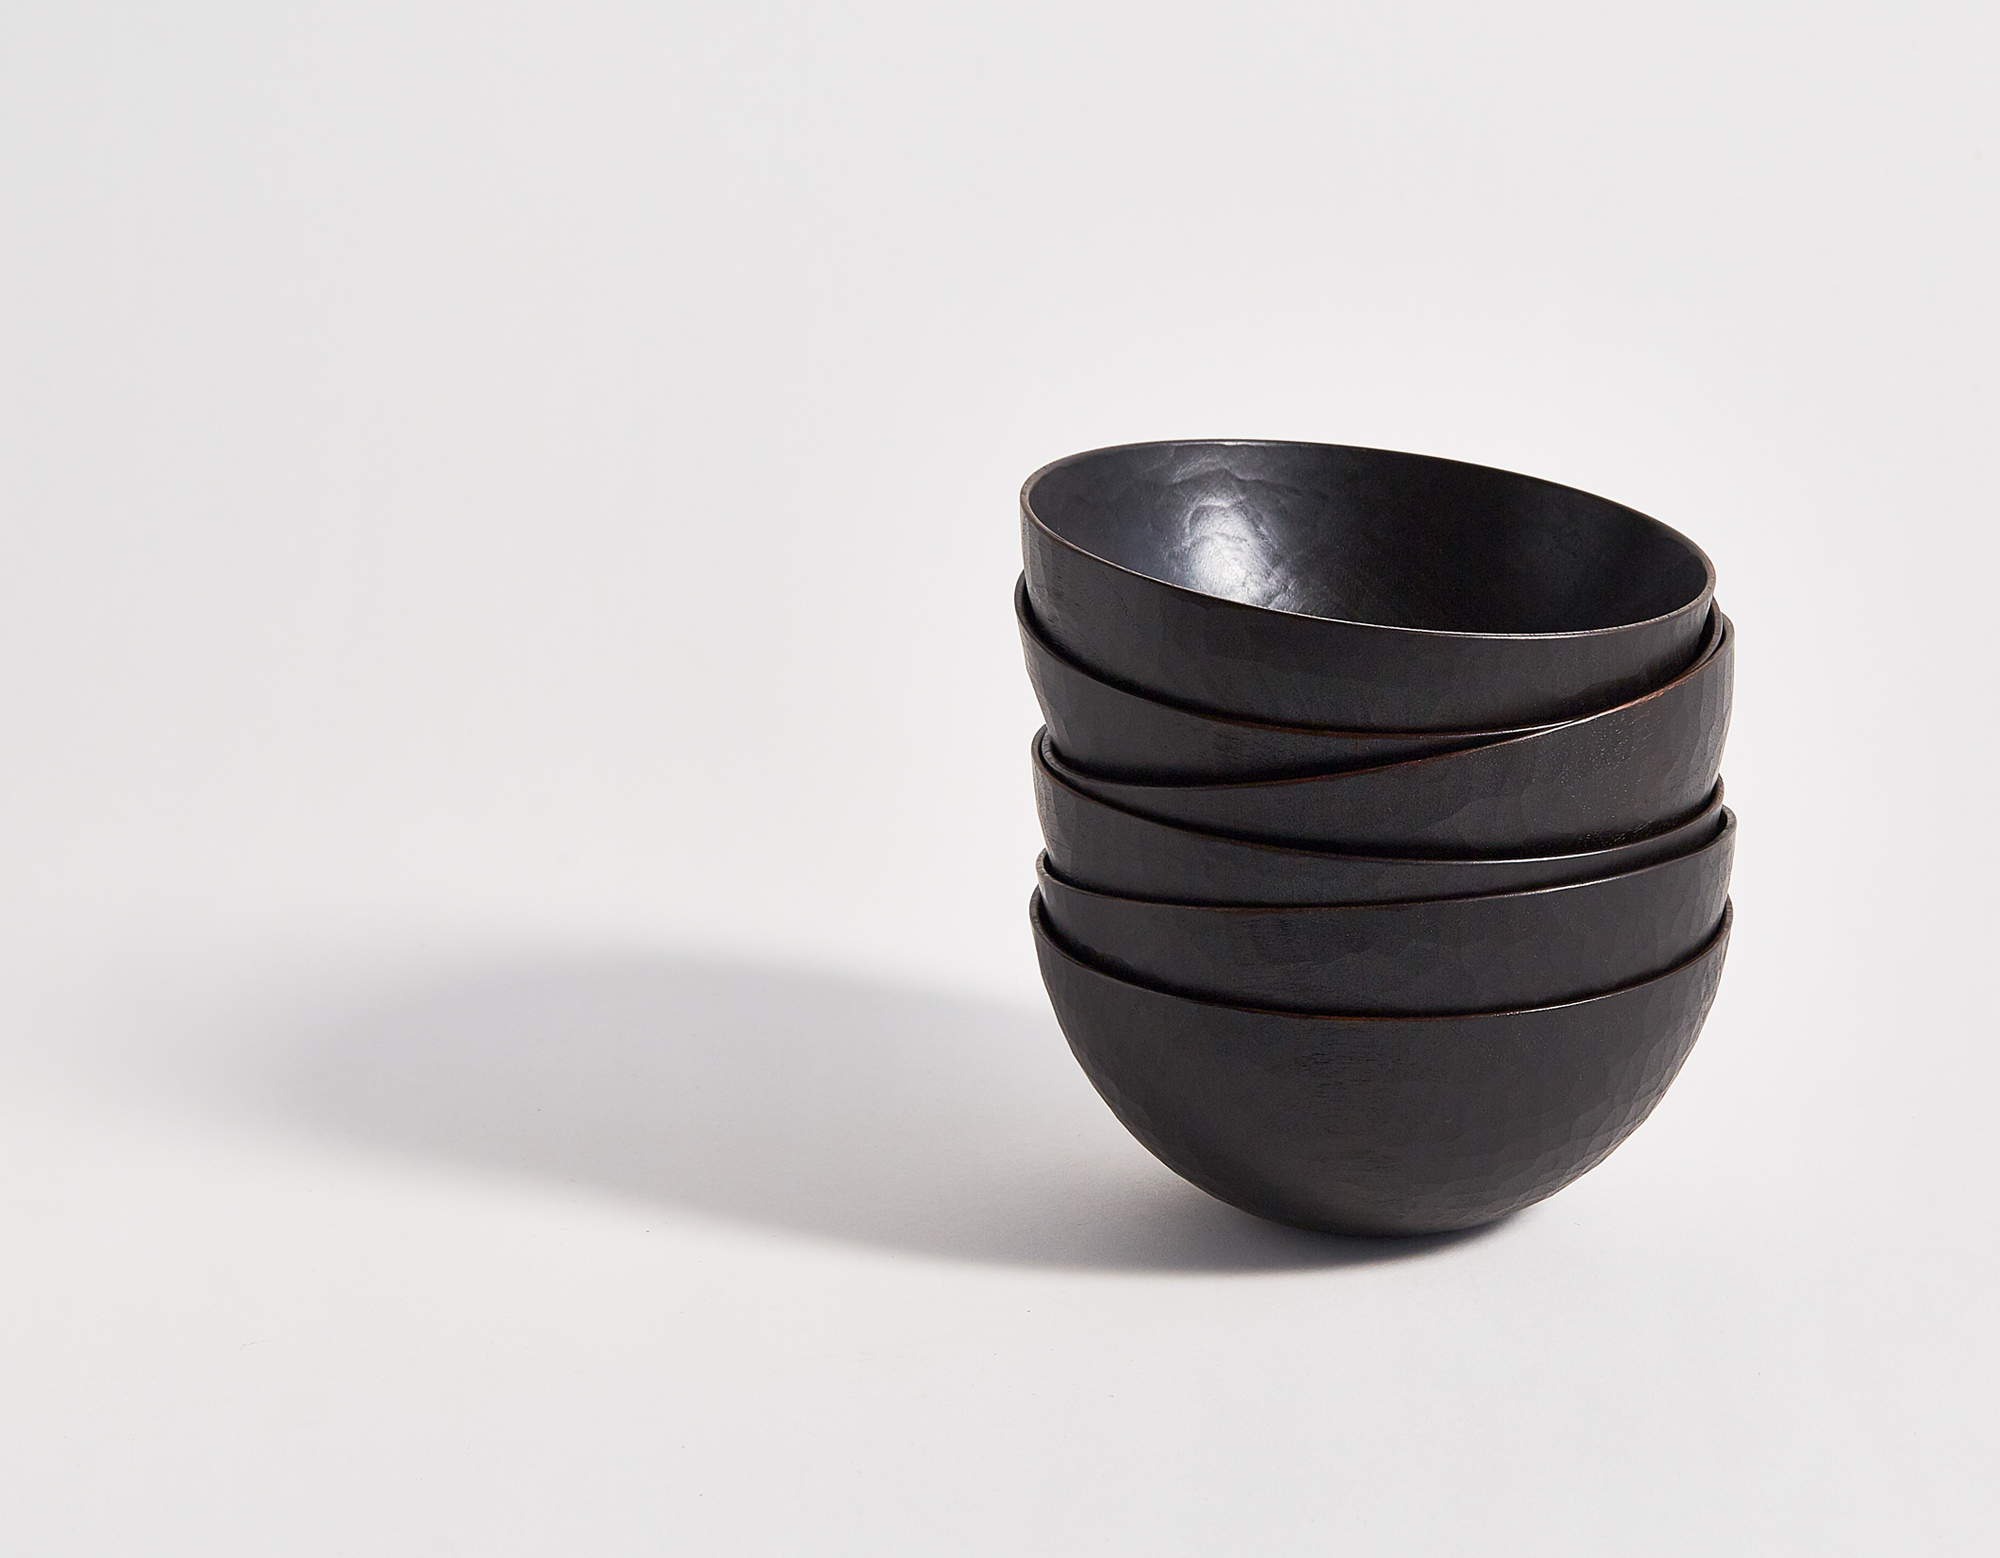 Six black walnut lacquered carved bowls stacked, by Ryuji Mitani